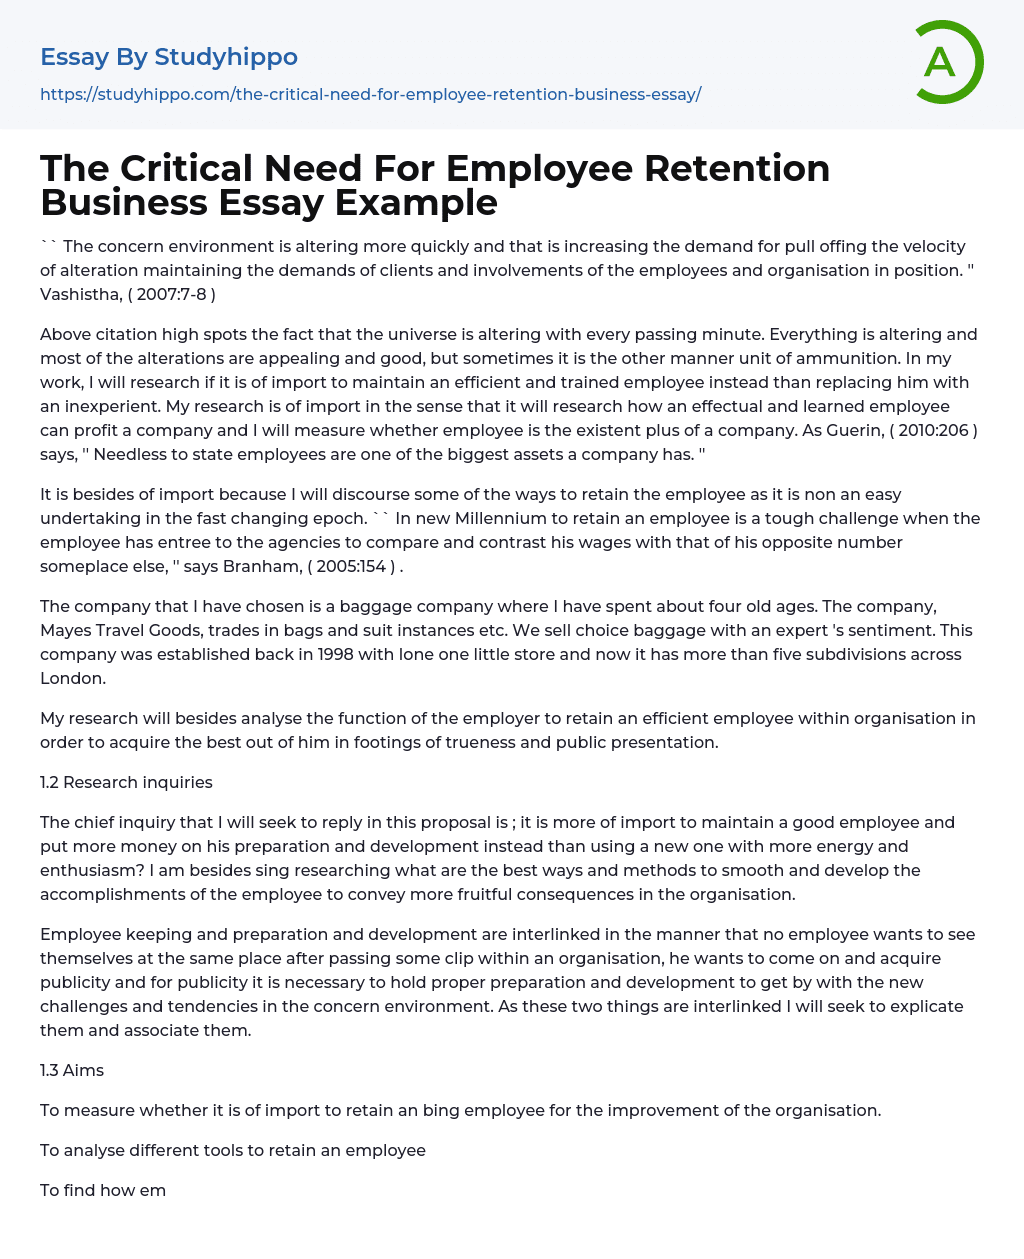 The Critical Need For Employee Retention Business Essay Example